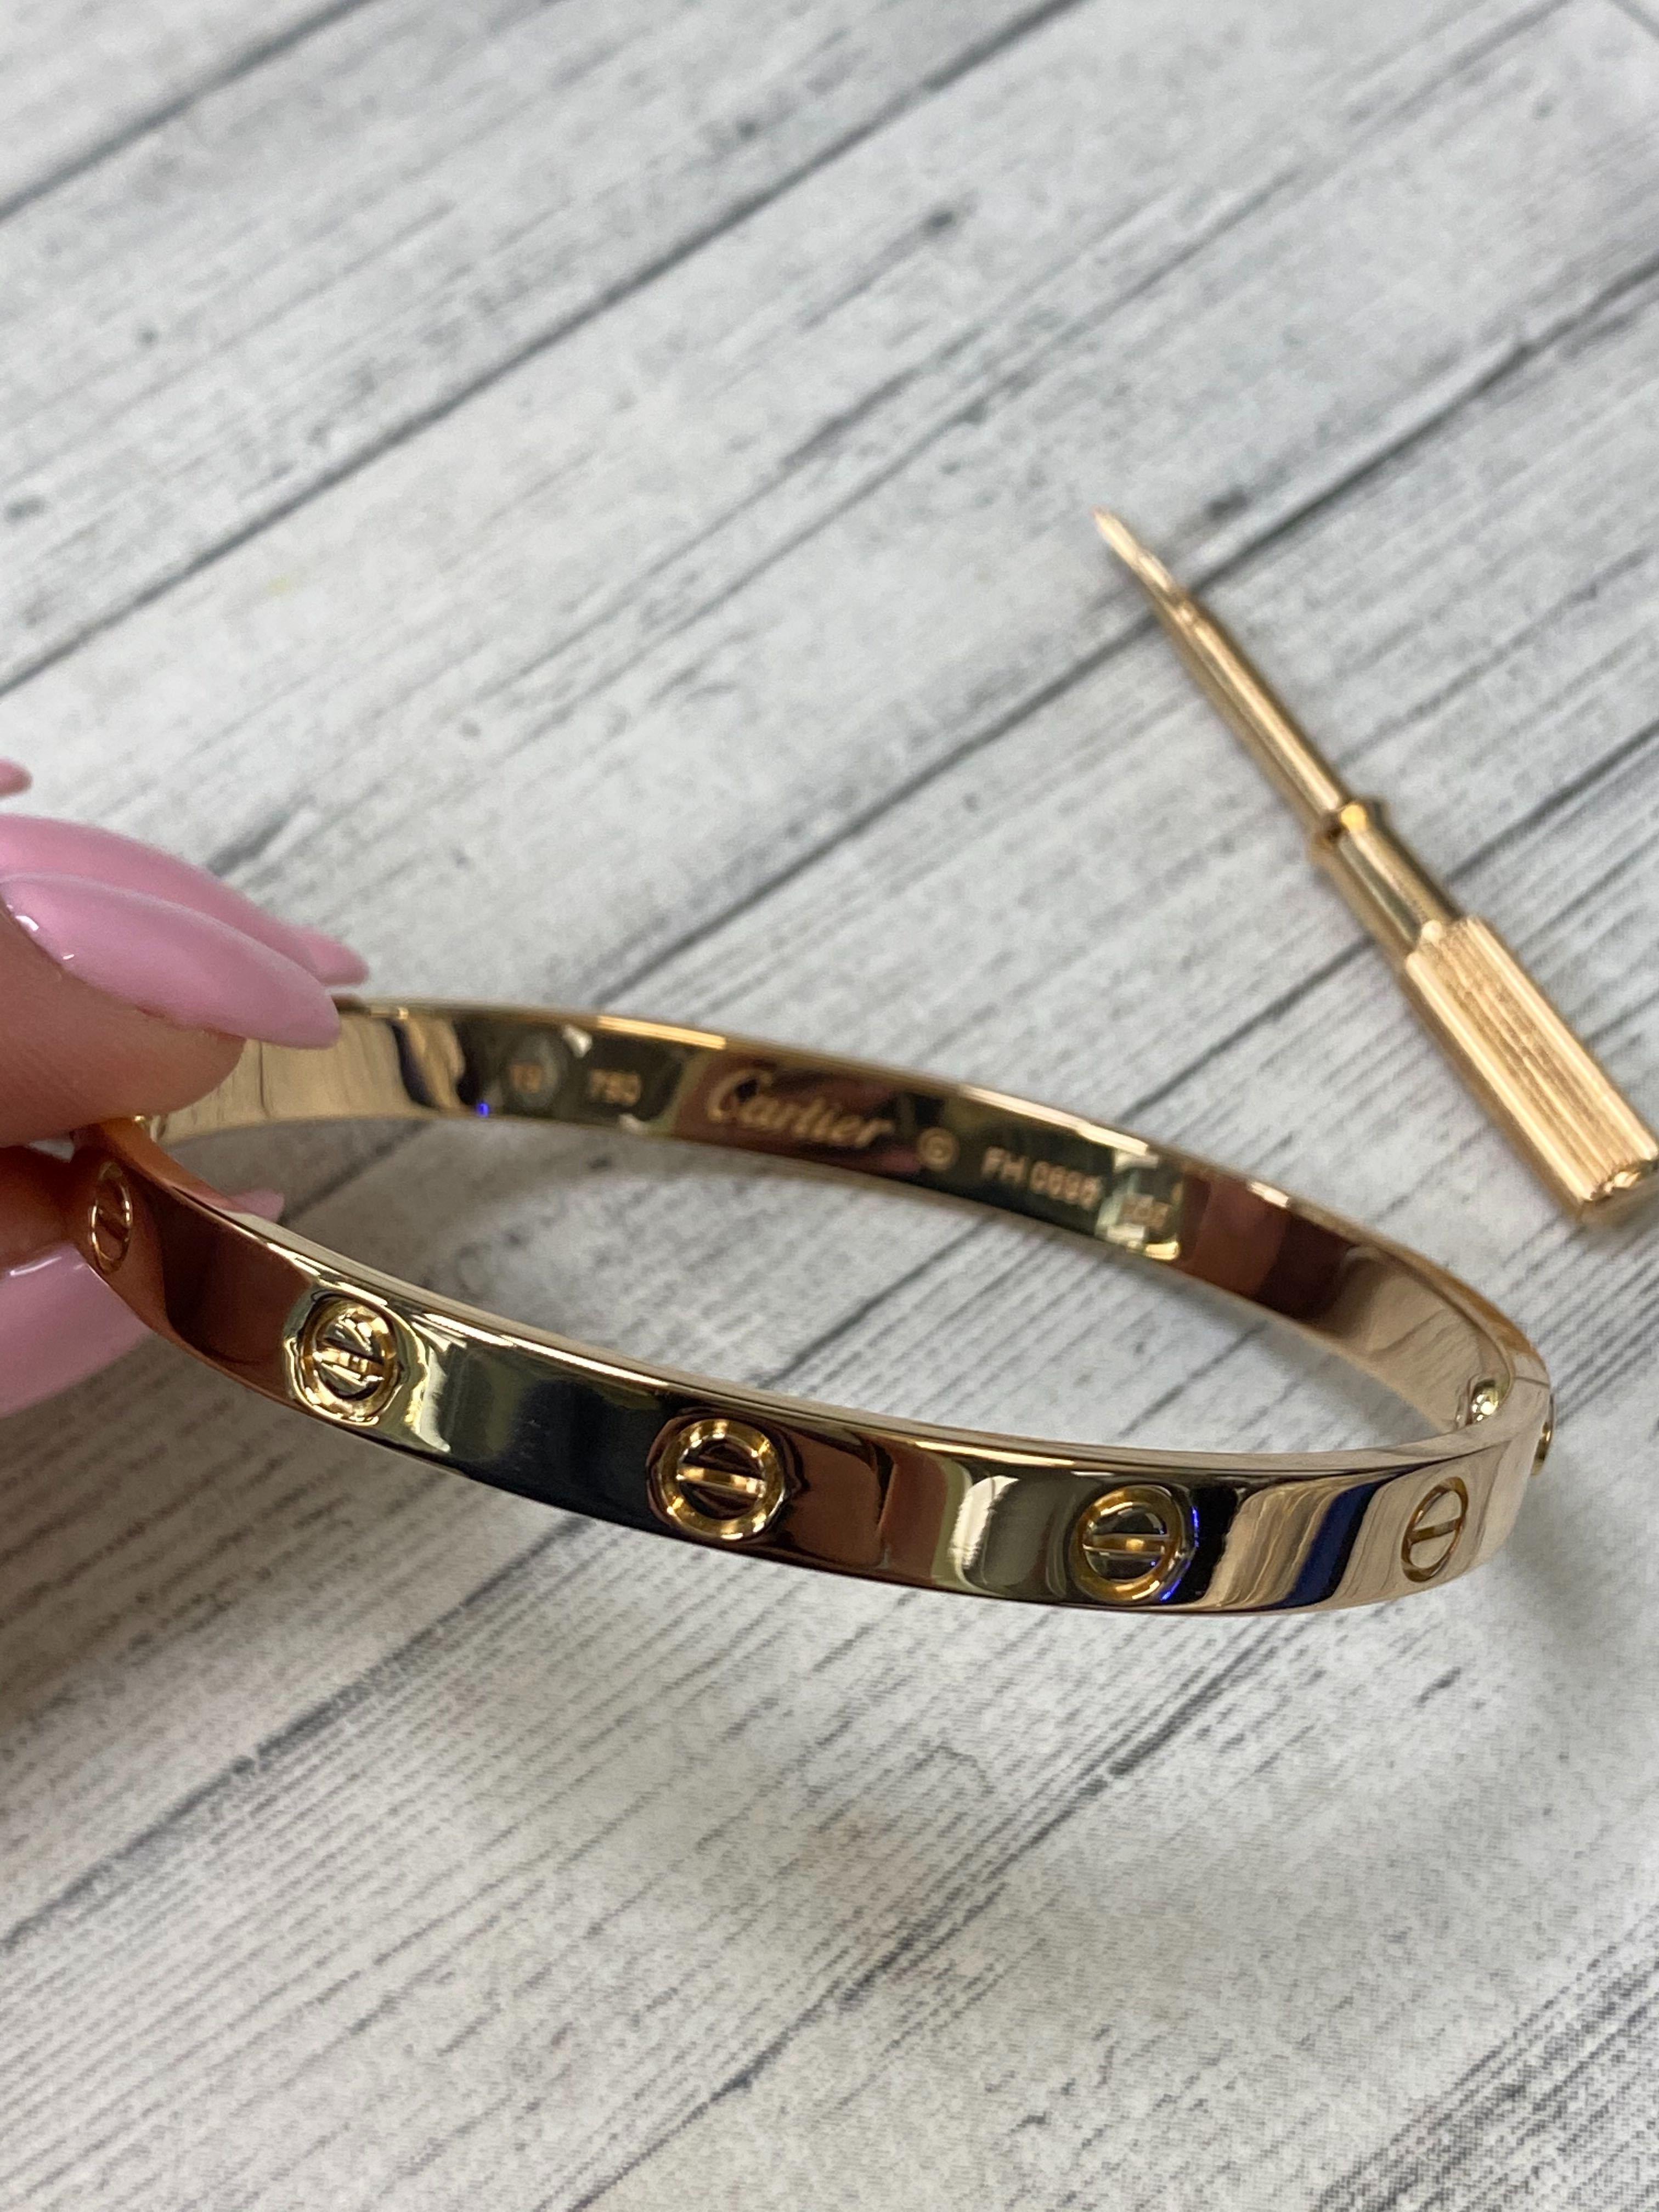 Cartier Love bracelet, 18K rose gold. Old screw system. Width: 6.1mm. Size 19.
Condition: pre-owned, looks great. Comes with a screw driver. Box and papers are not included.